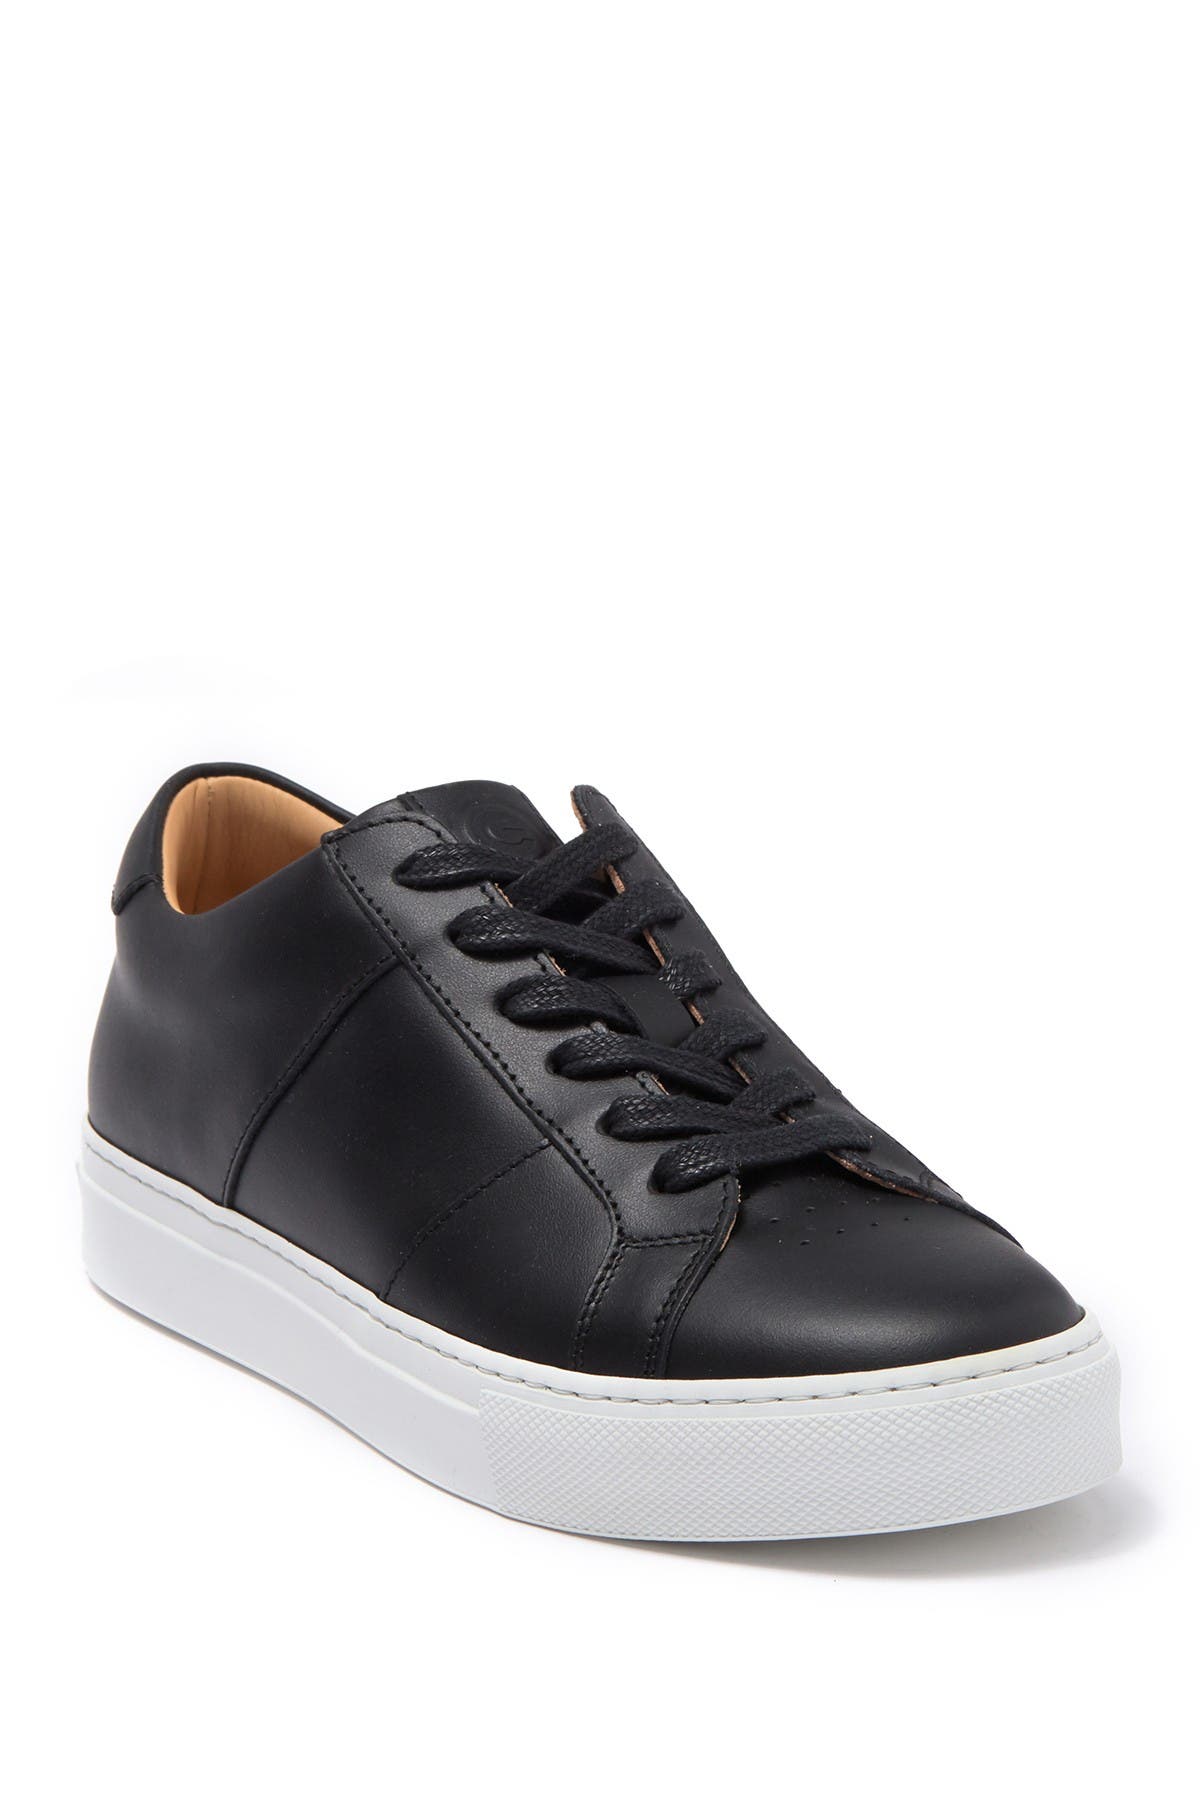 GREATS | Royale Leather Sneaker 